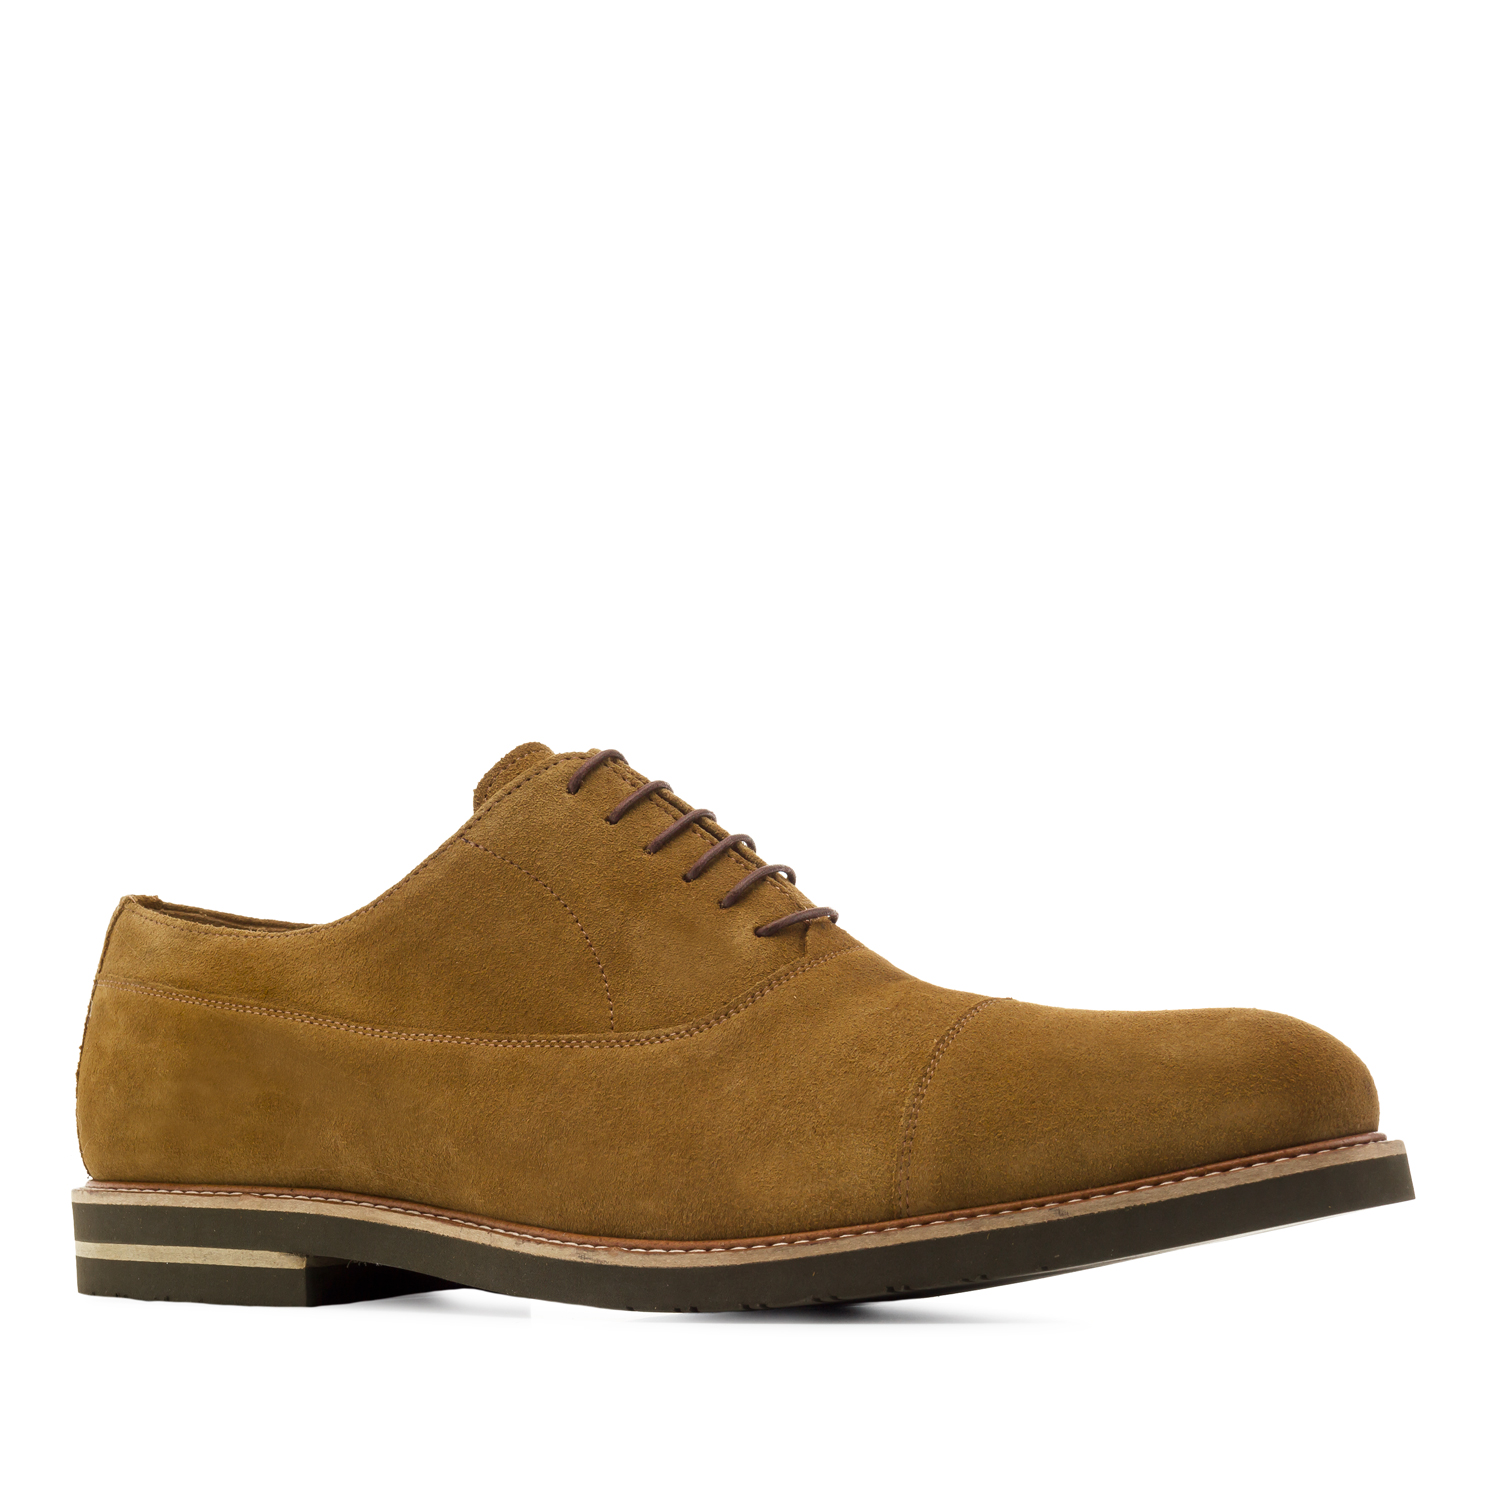 Oxford Shoes in Camel Split Leather 